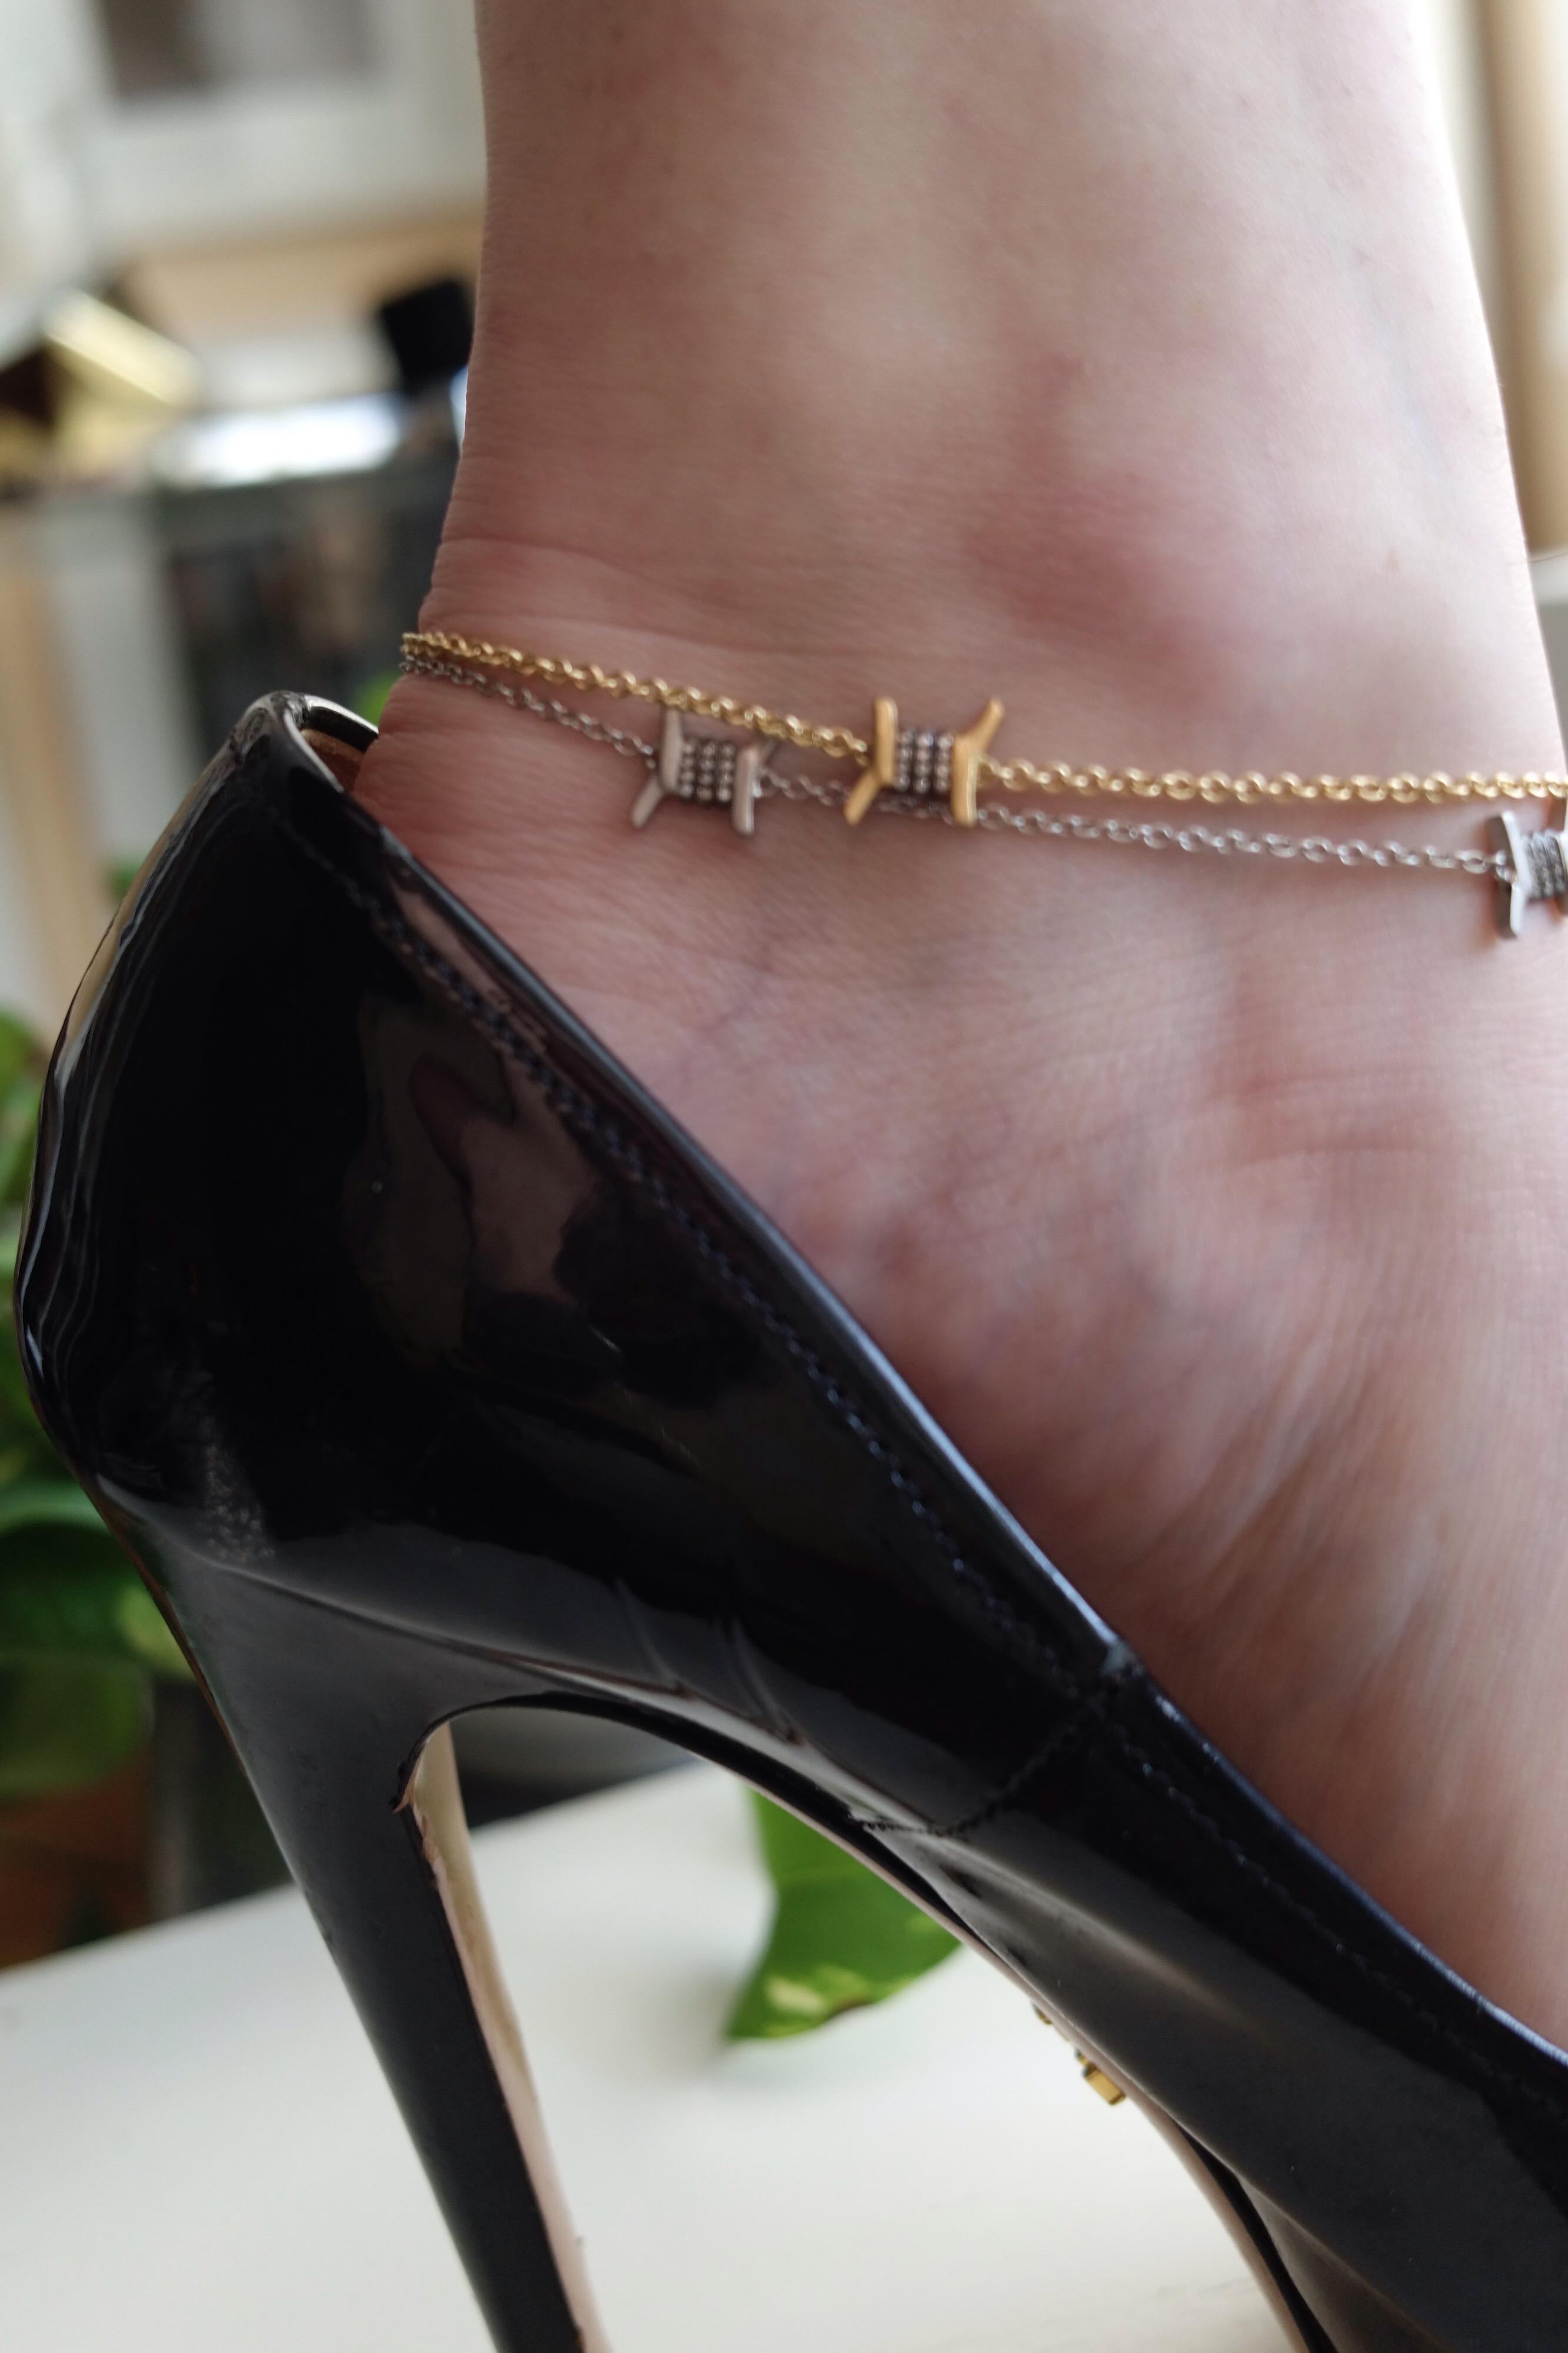 Nothing is sexier than a delicate gold chain on your ankle. This one brings some edginess to the look with its barbed-wire motif.

18K yellow gold, satin finish.
48 diamond rounds totaling 0.16 carats (E/F, VS1/VS2).
9 1/2